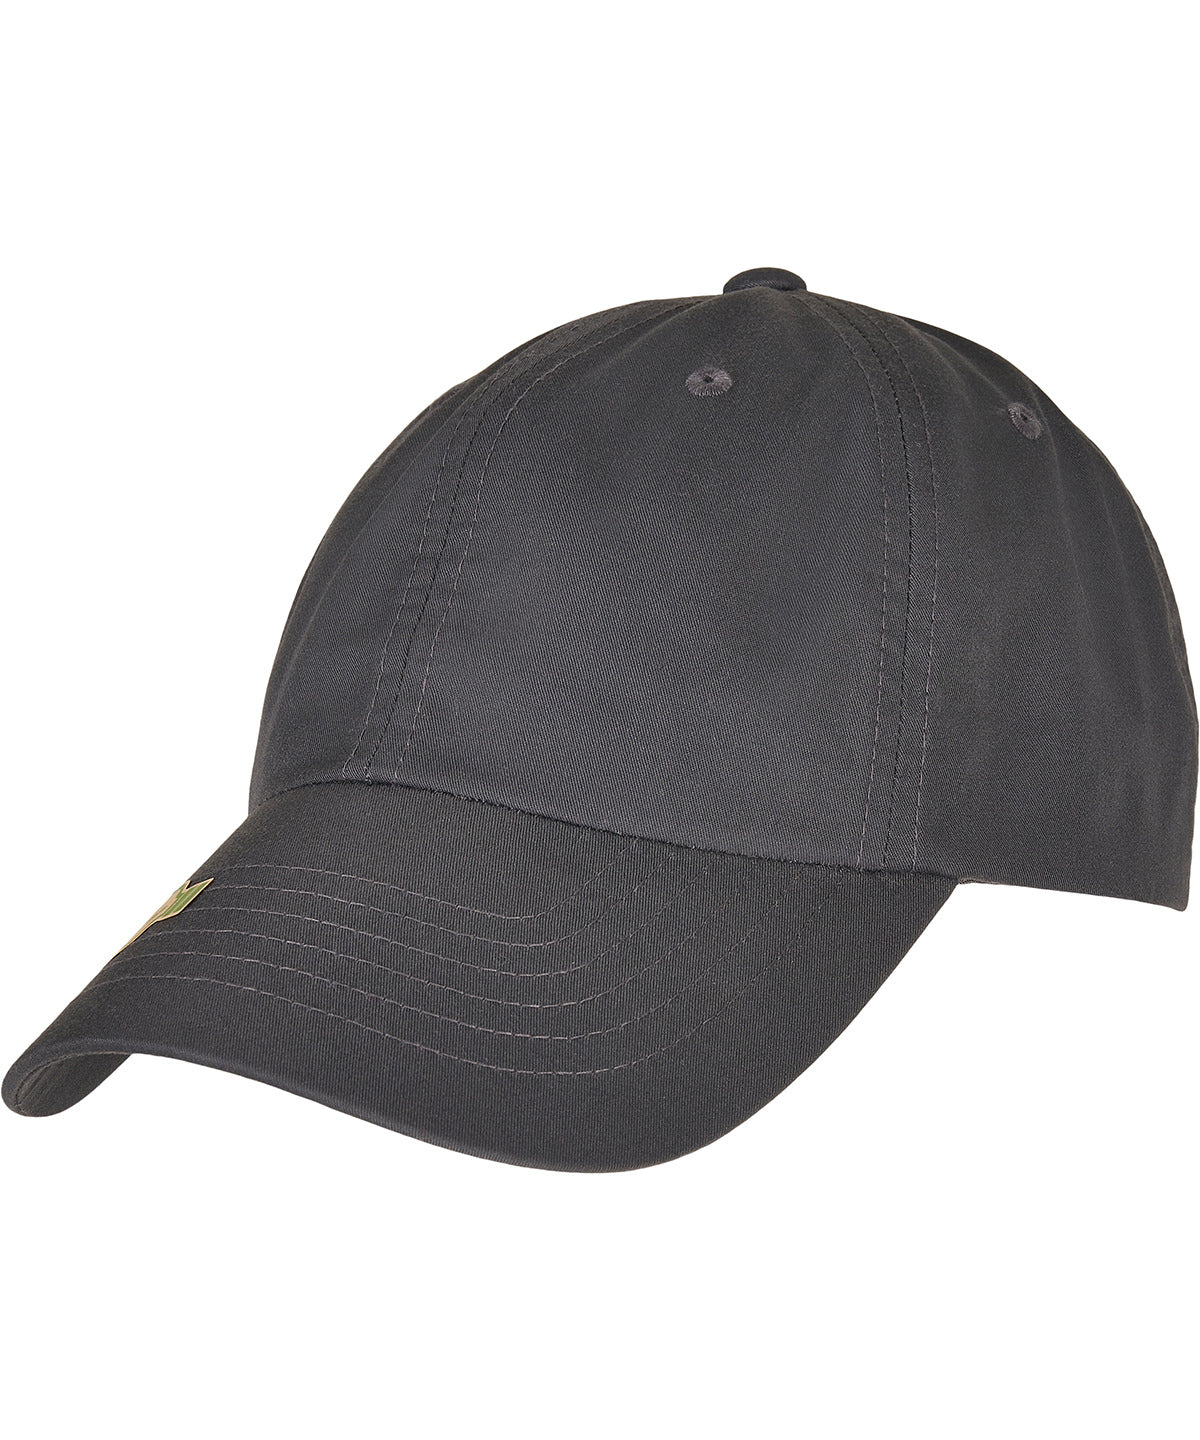 Recycled polyester dad cap